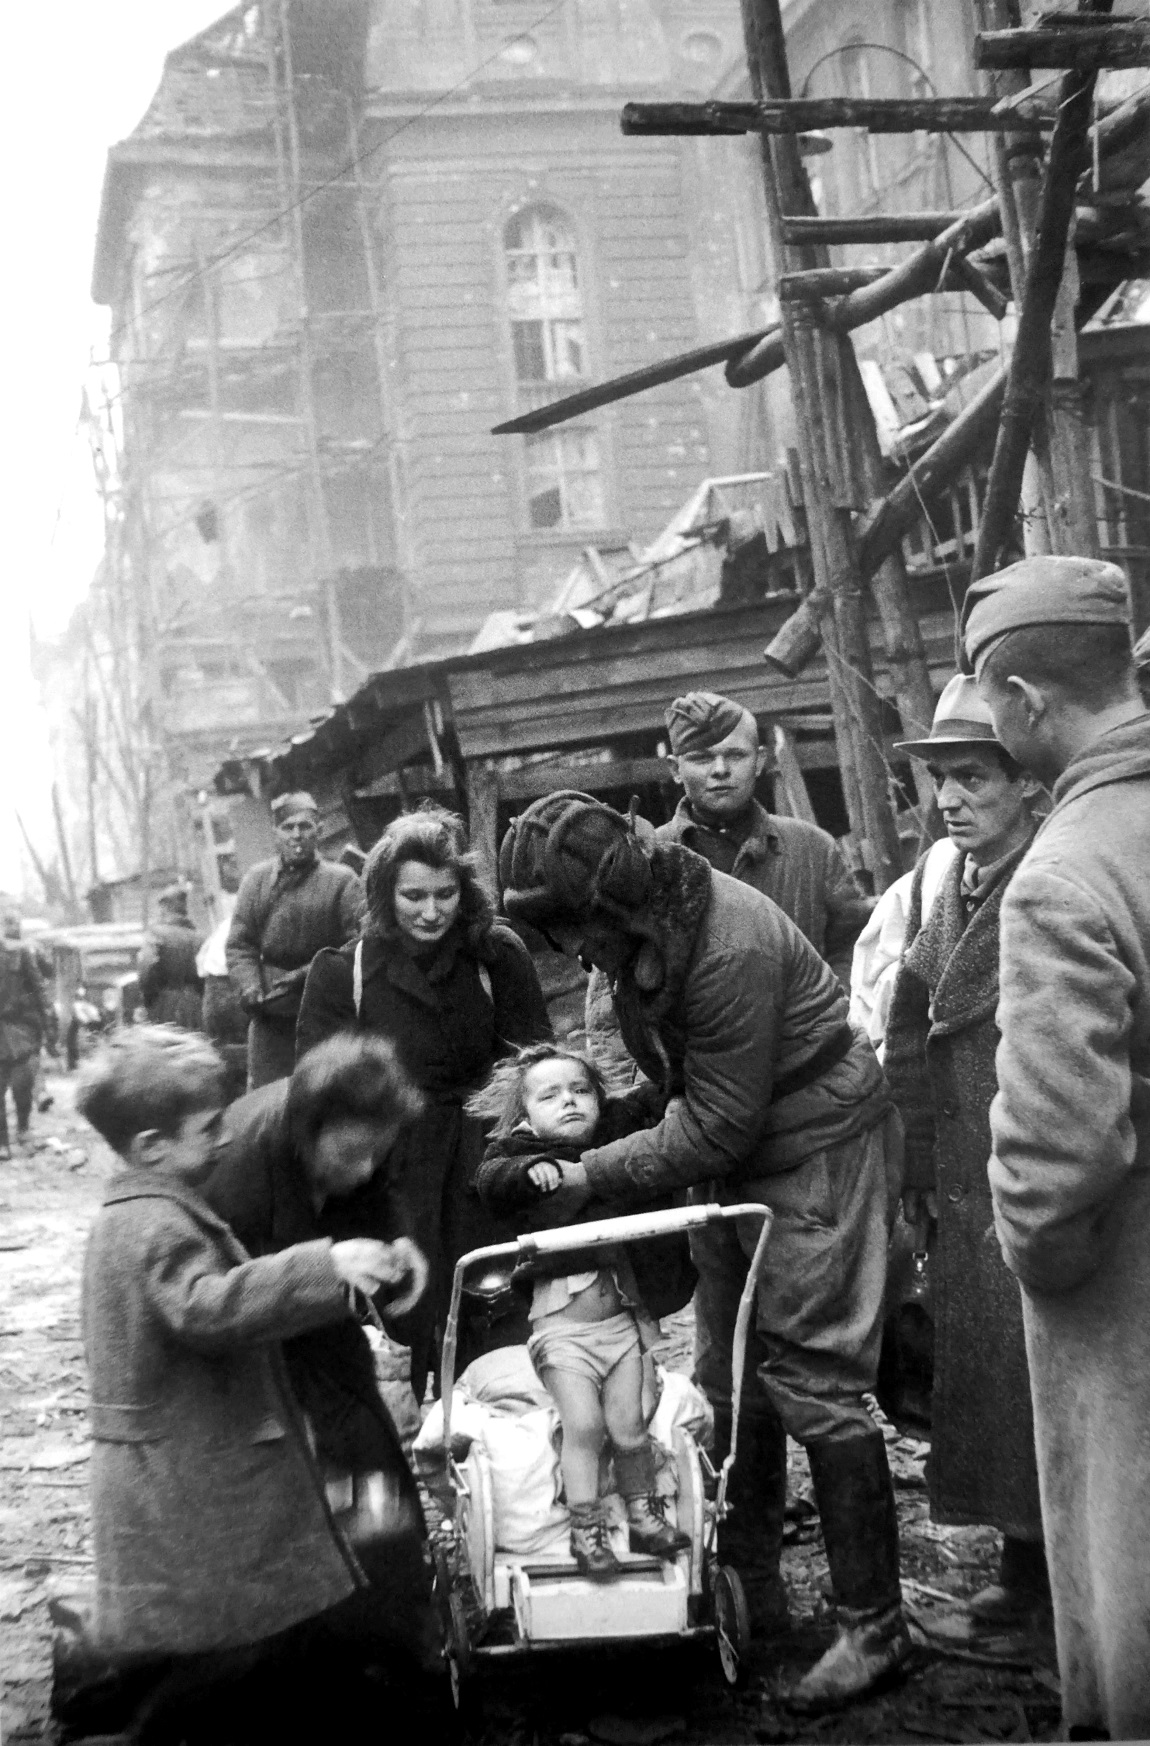 Soviet soldiers try to engage a less than cooperative German toddler for a photograph in the ruins of Monbijoustraße in defeated and Soviet occupied Berlin as the child’s mother looks on in resignation. May 1945